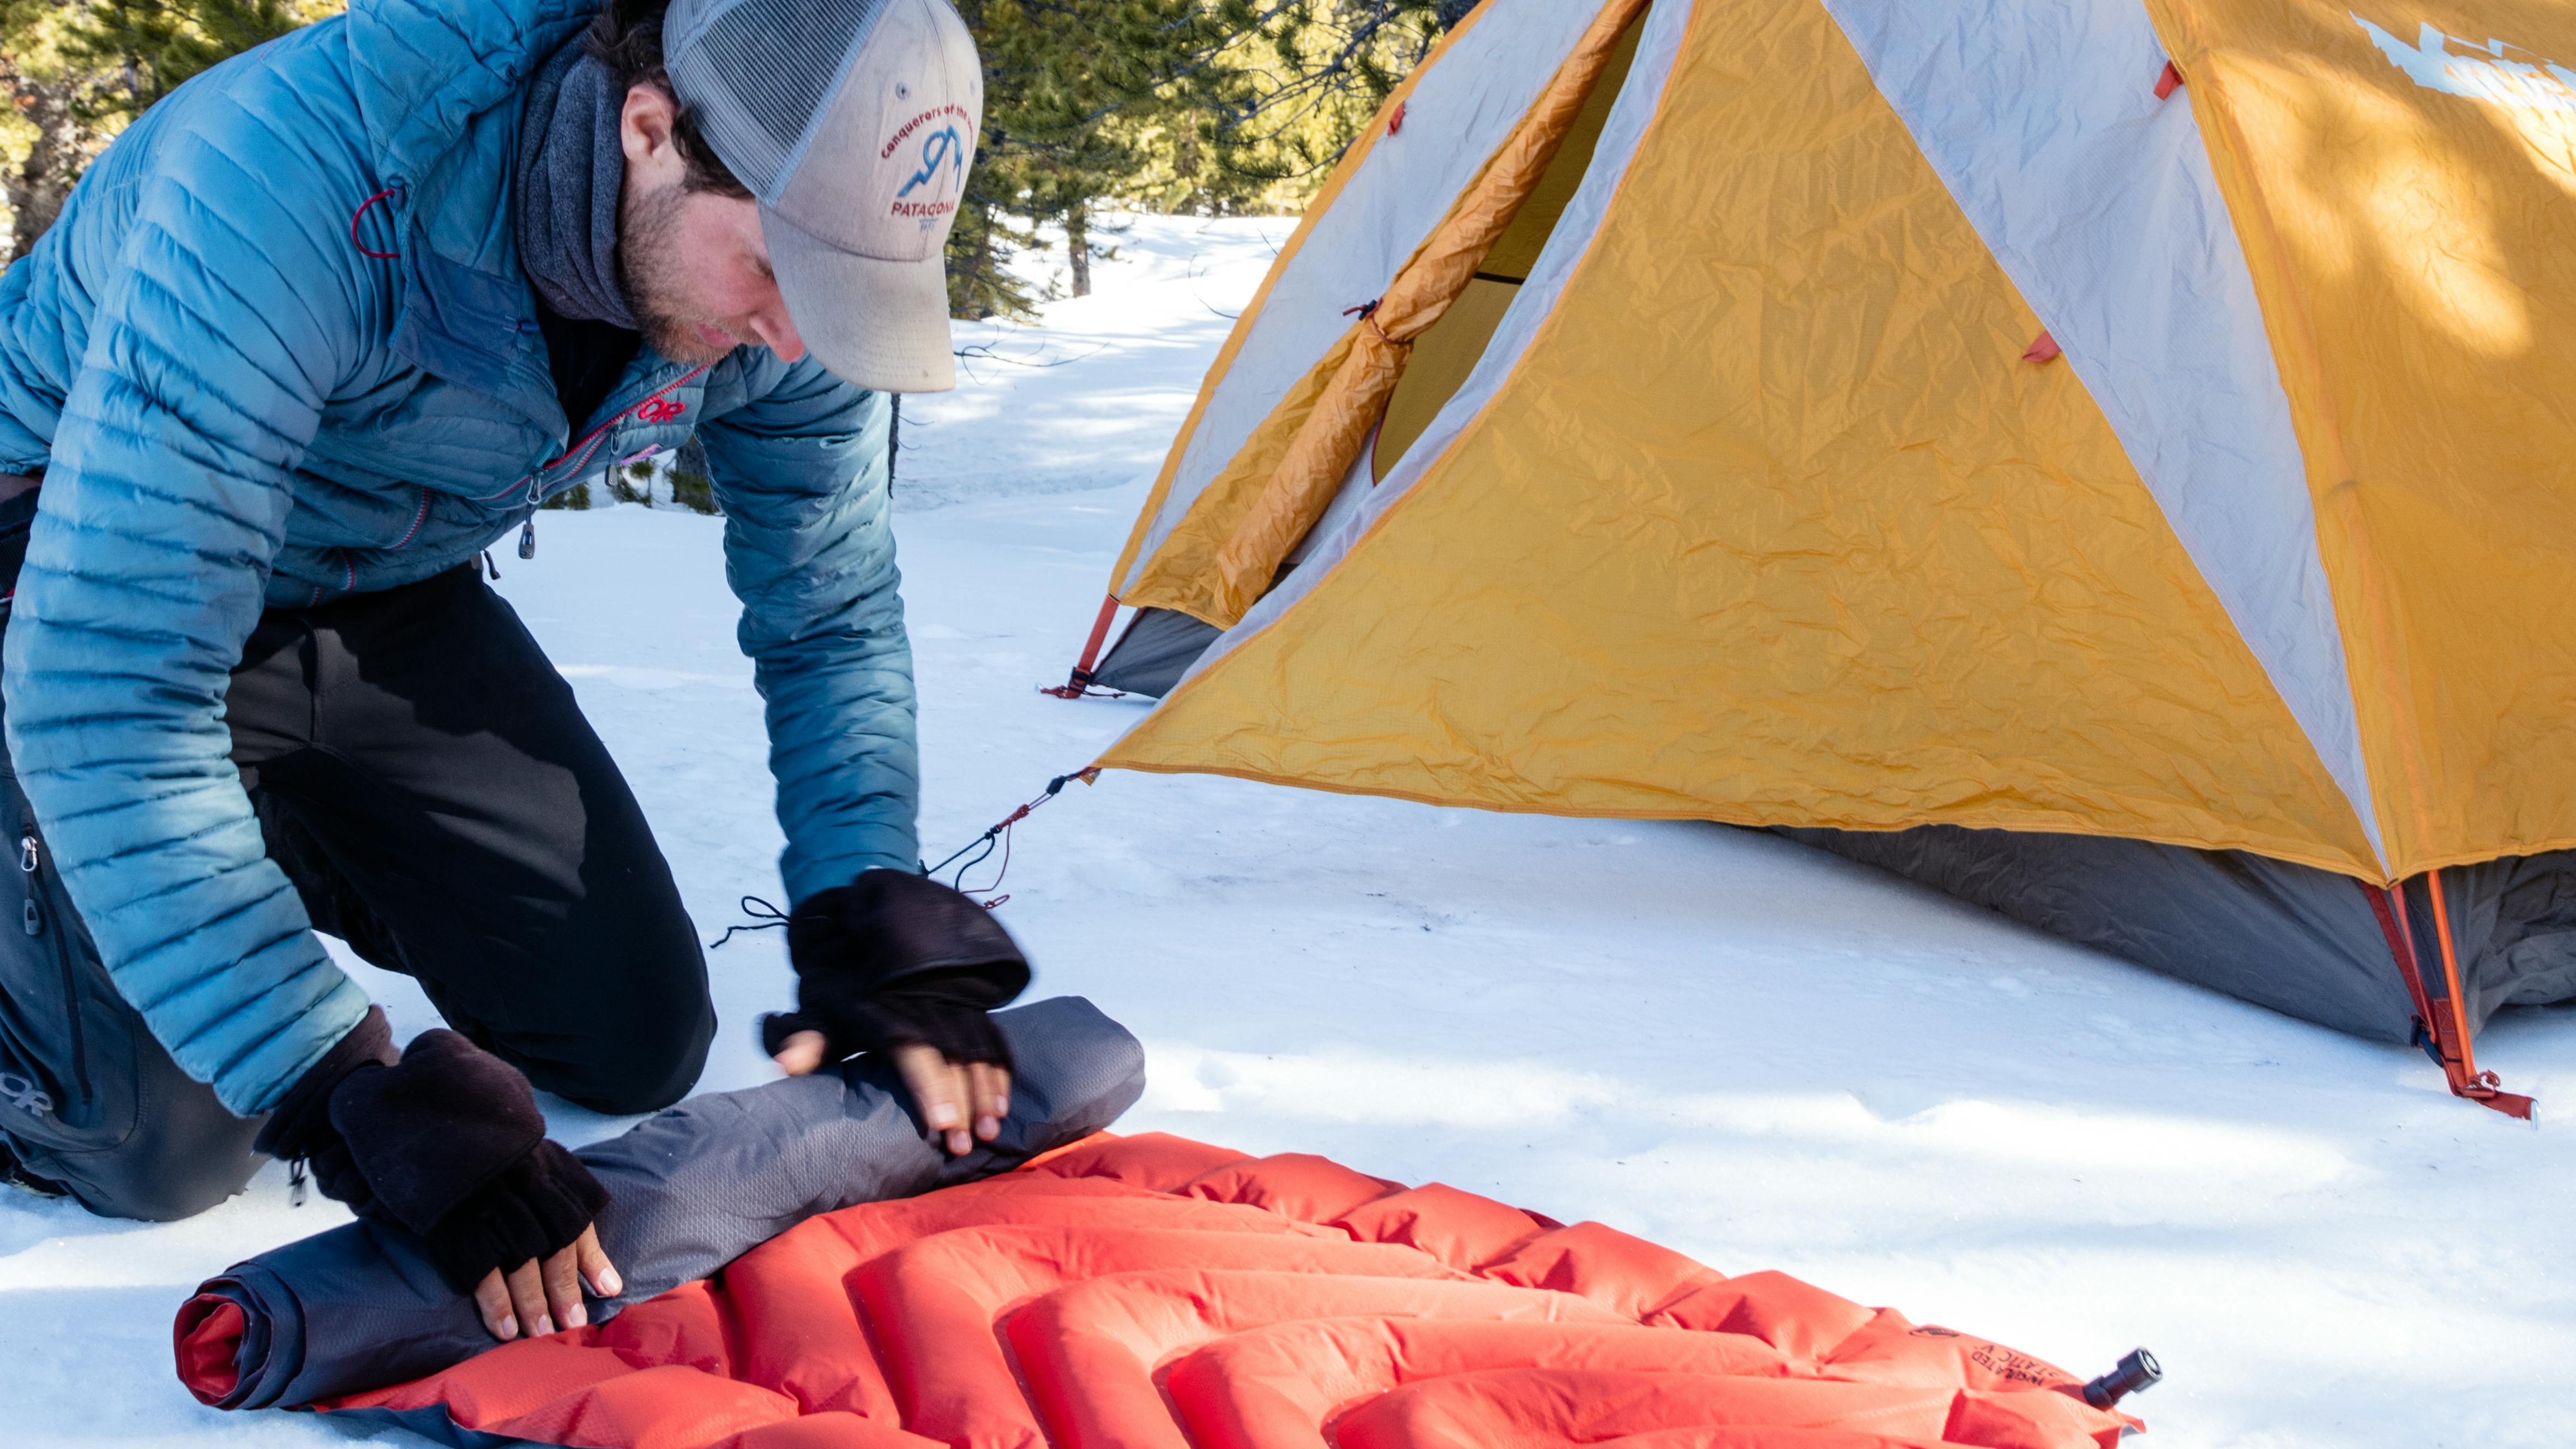 A man rolling up a sleeping pad. There is snow on the ground and a tent set up nearby.